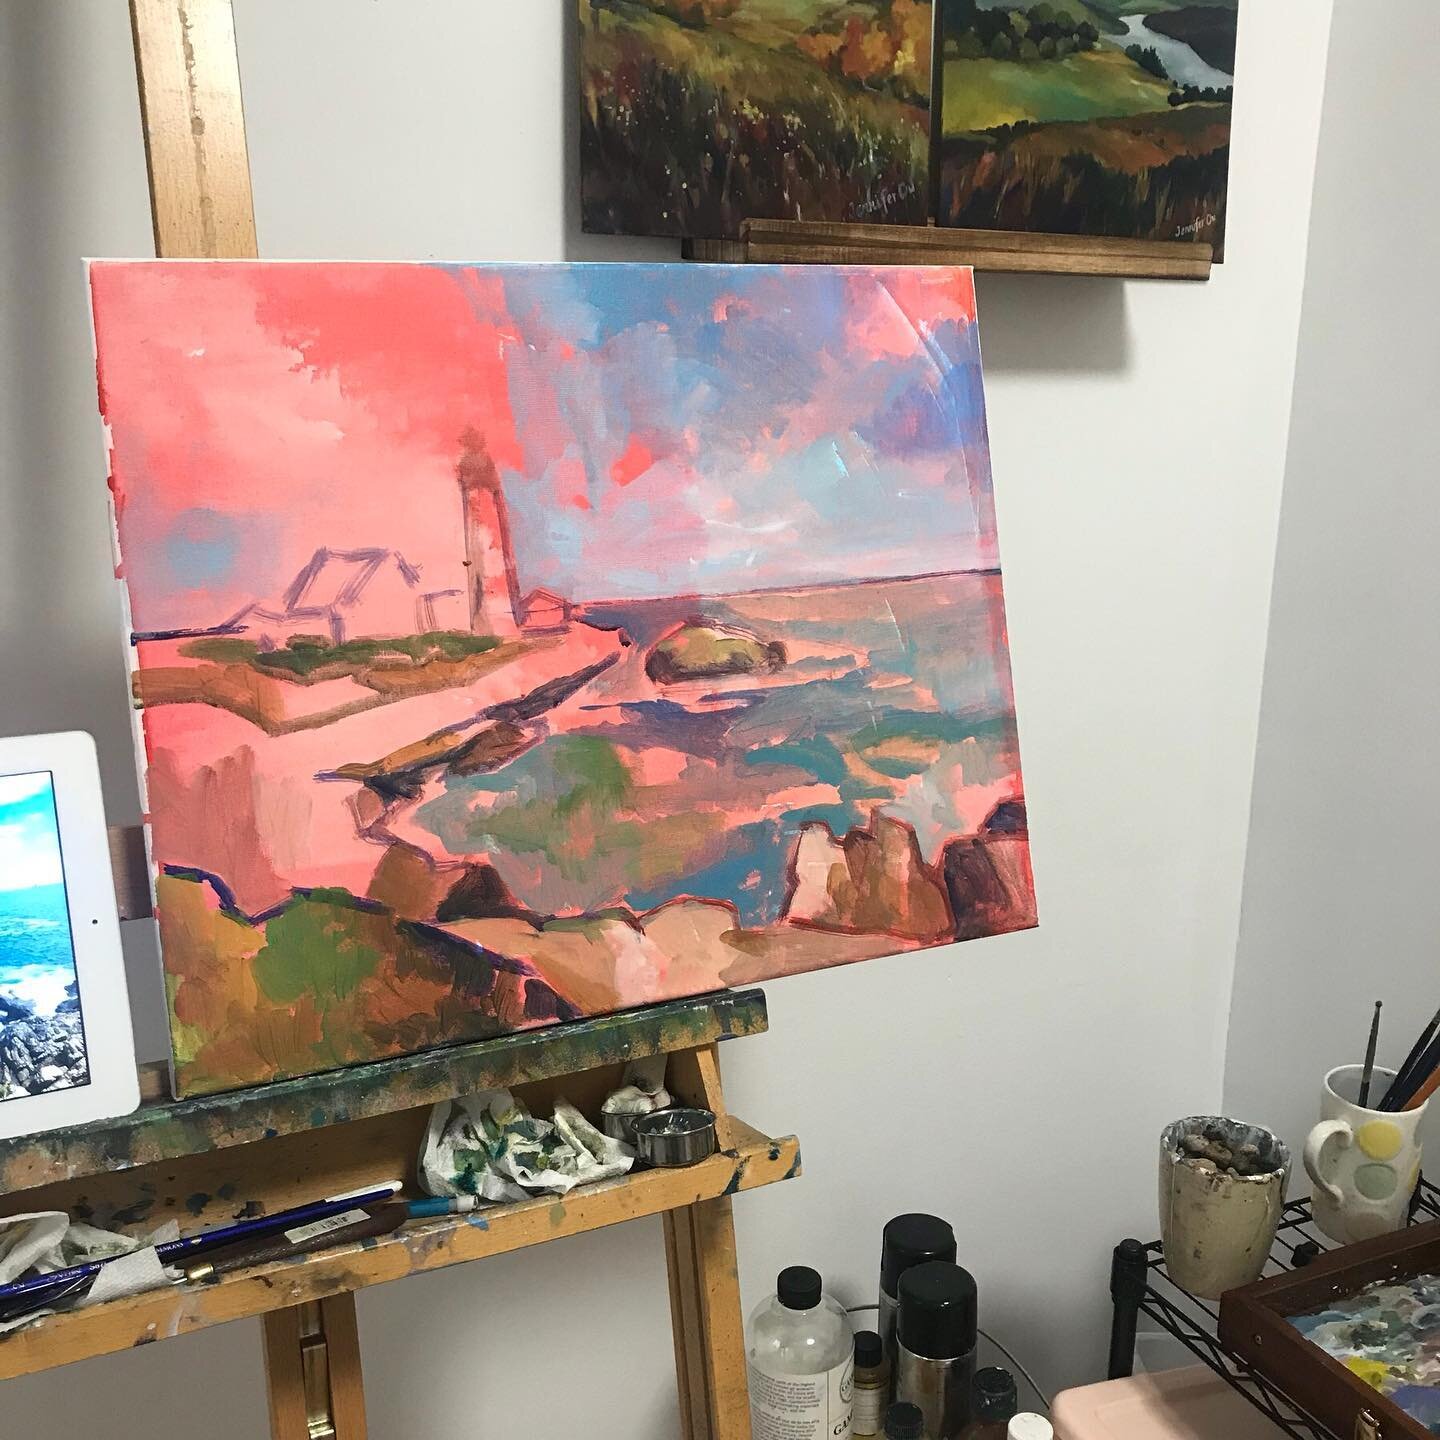 The first layers. ❤️ I decided there&rsquo;s no such thing as too many lighthouses, and I&rsquo;m still in love with this coast. Adding this 16x20 to the collection. However, it&rsquo;s probably fall in Maine now! How quickly the seasons change.